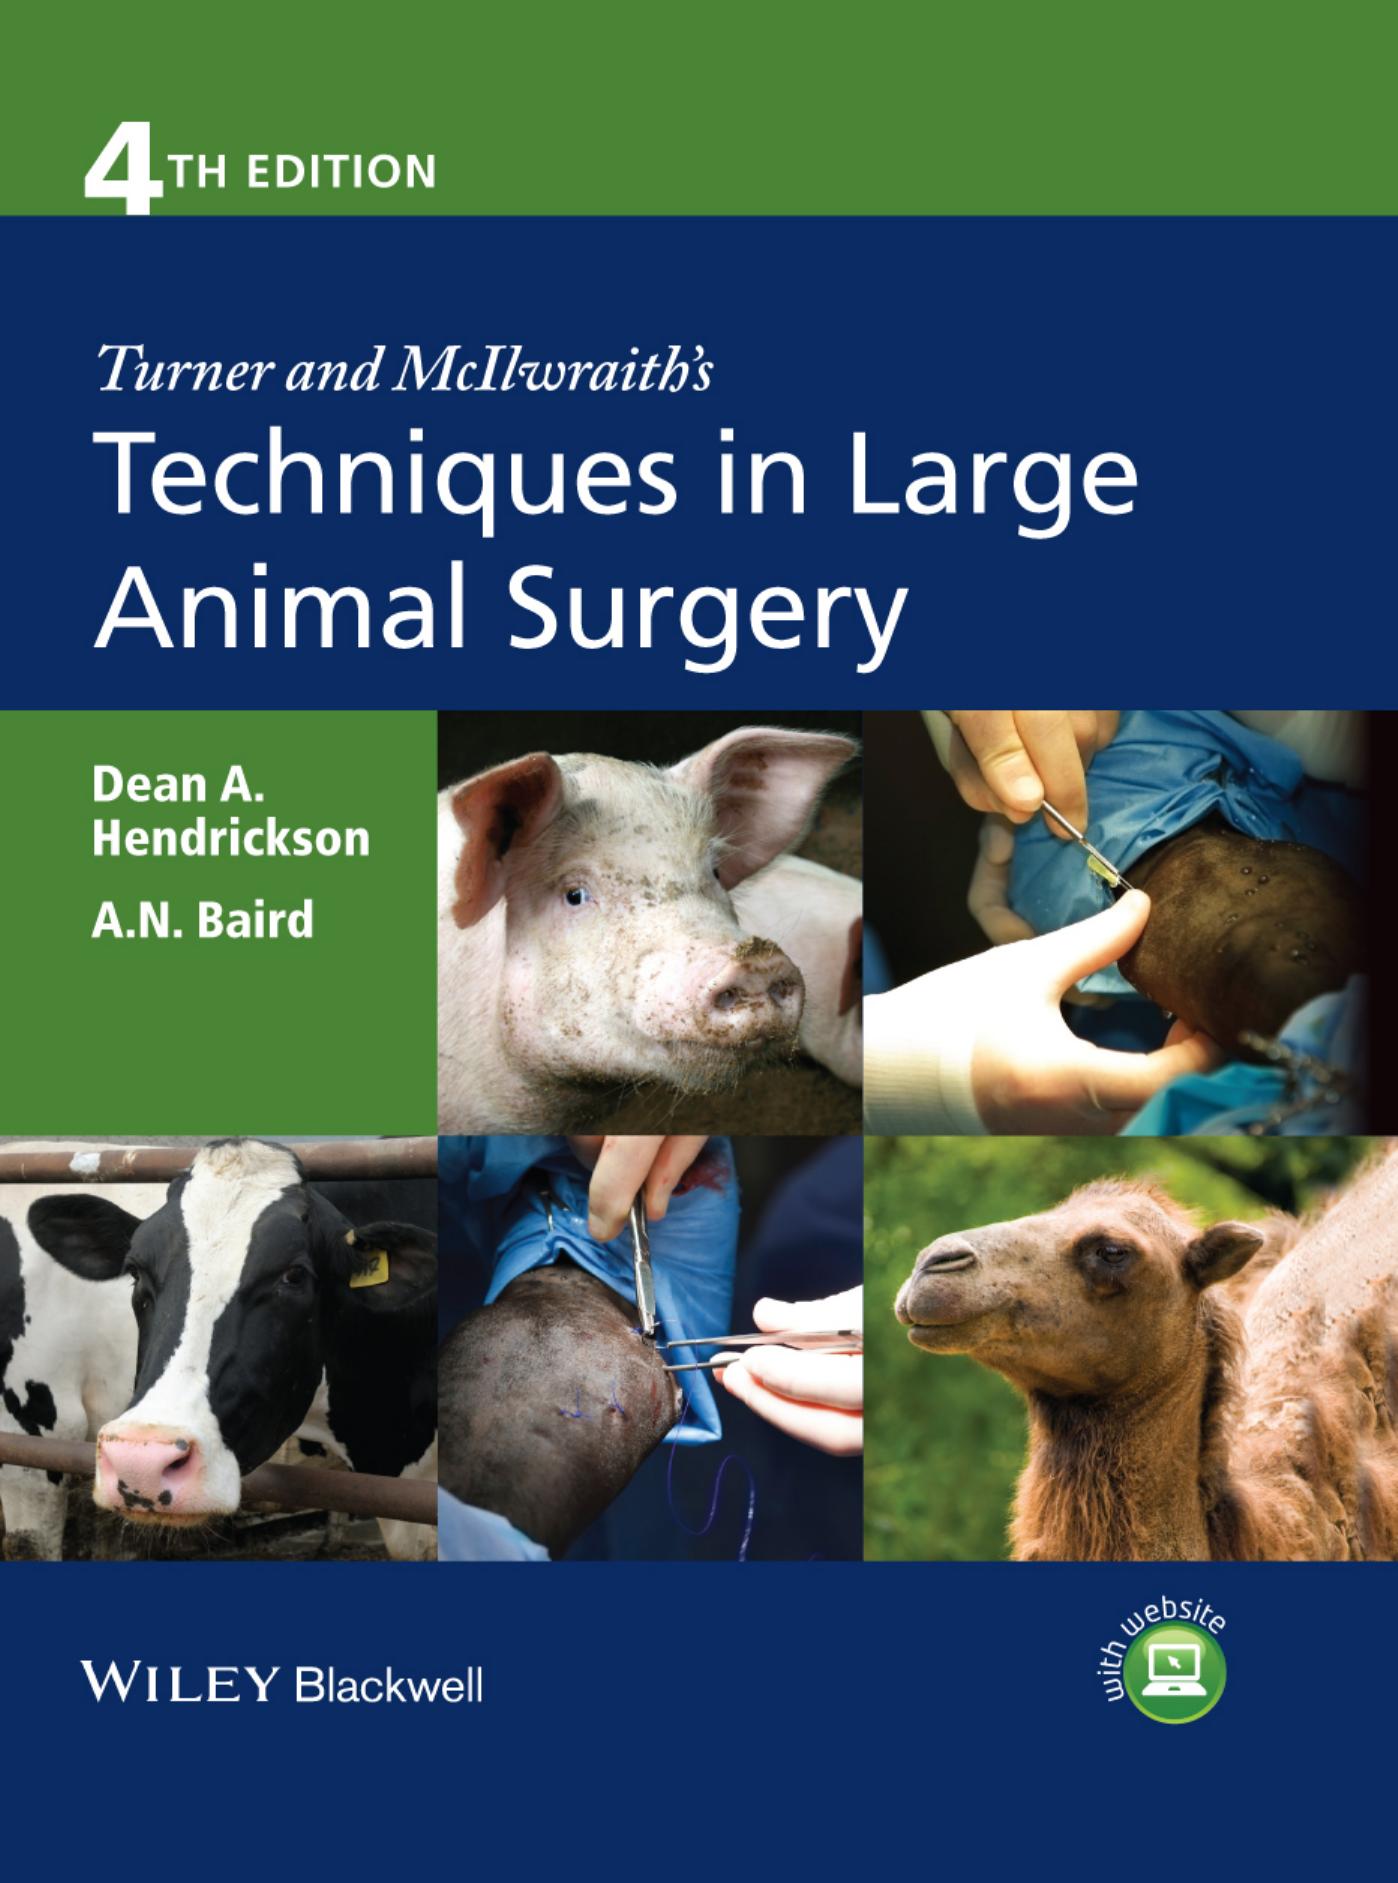 Turner and McIlwraith's Techniques in Large Animal Surgery, 4th Edition